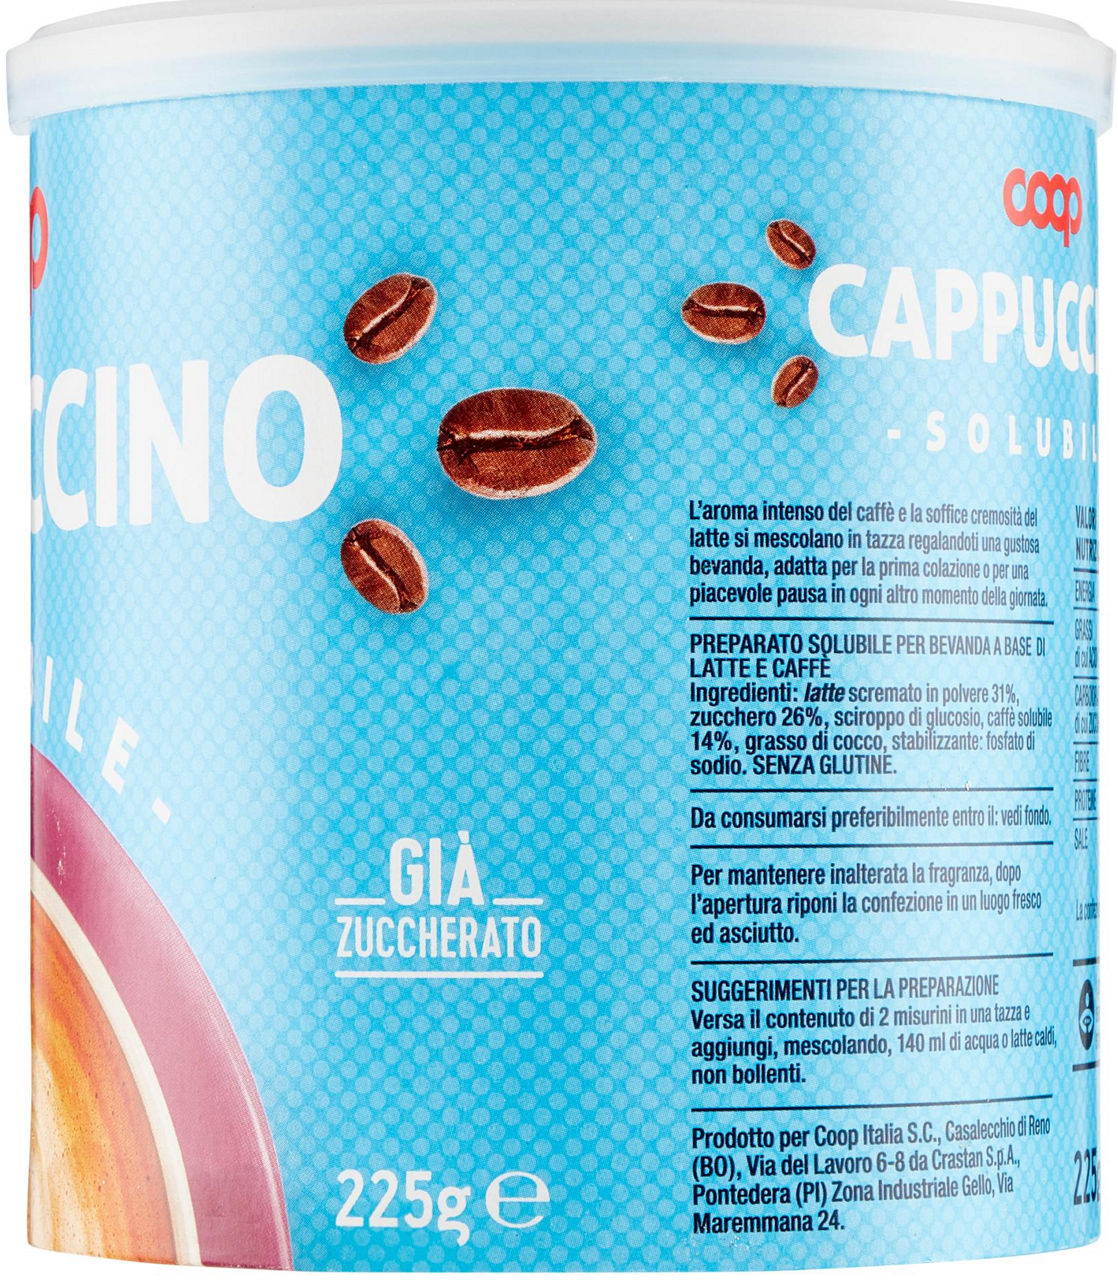 CAPPUCCINO SOLUBILE COOP225G - 3